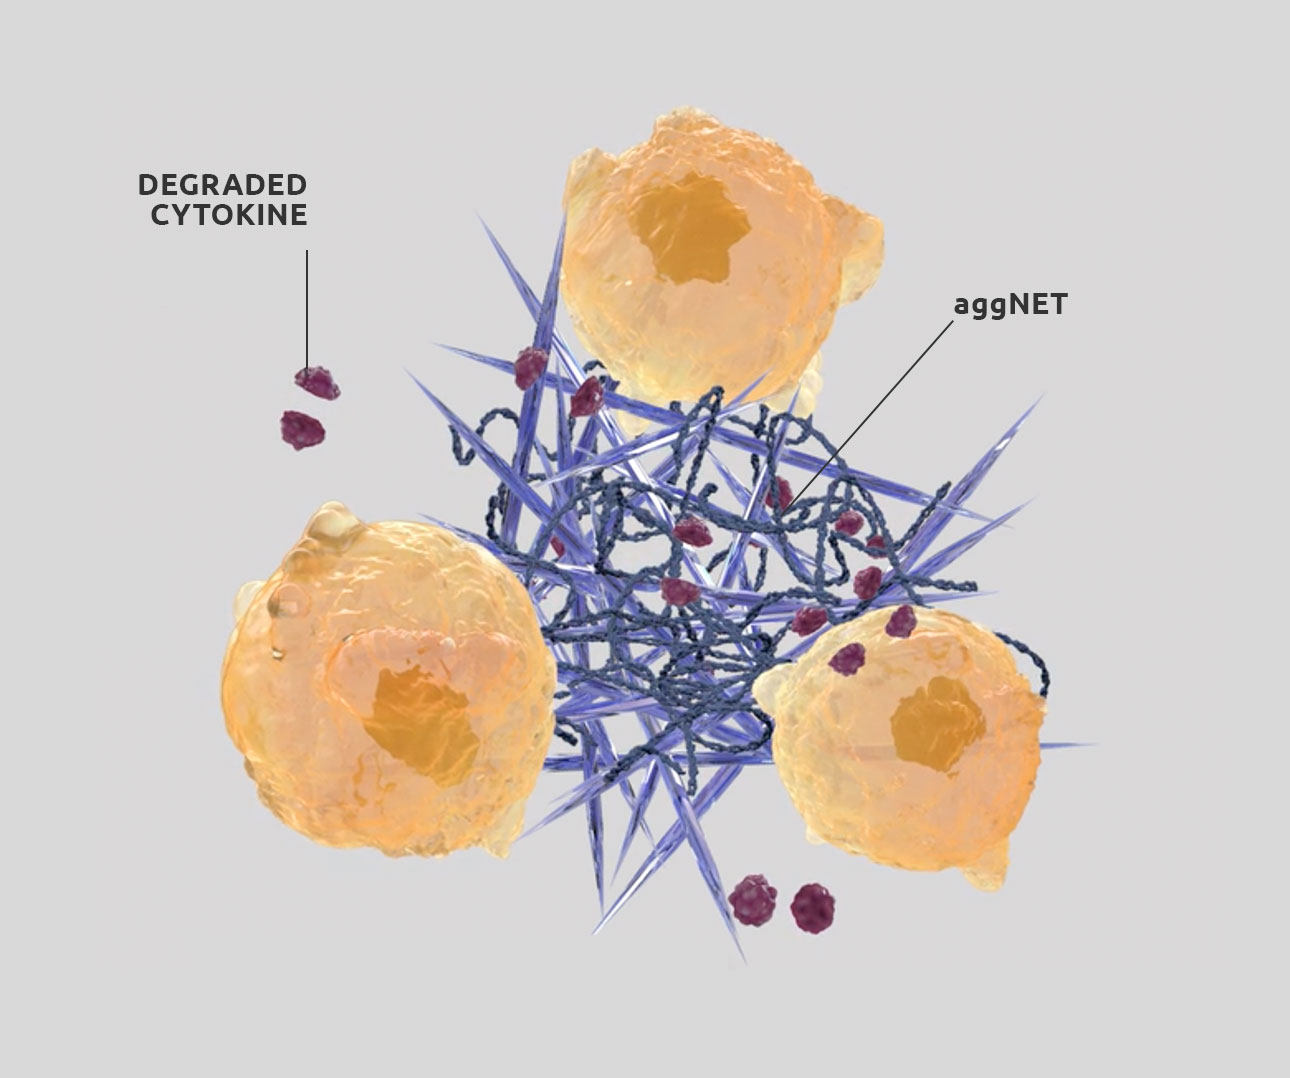 Illustration representing the role aggNETs play in gout pathophysiology and pain resolution